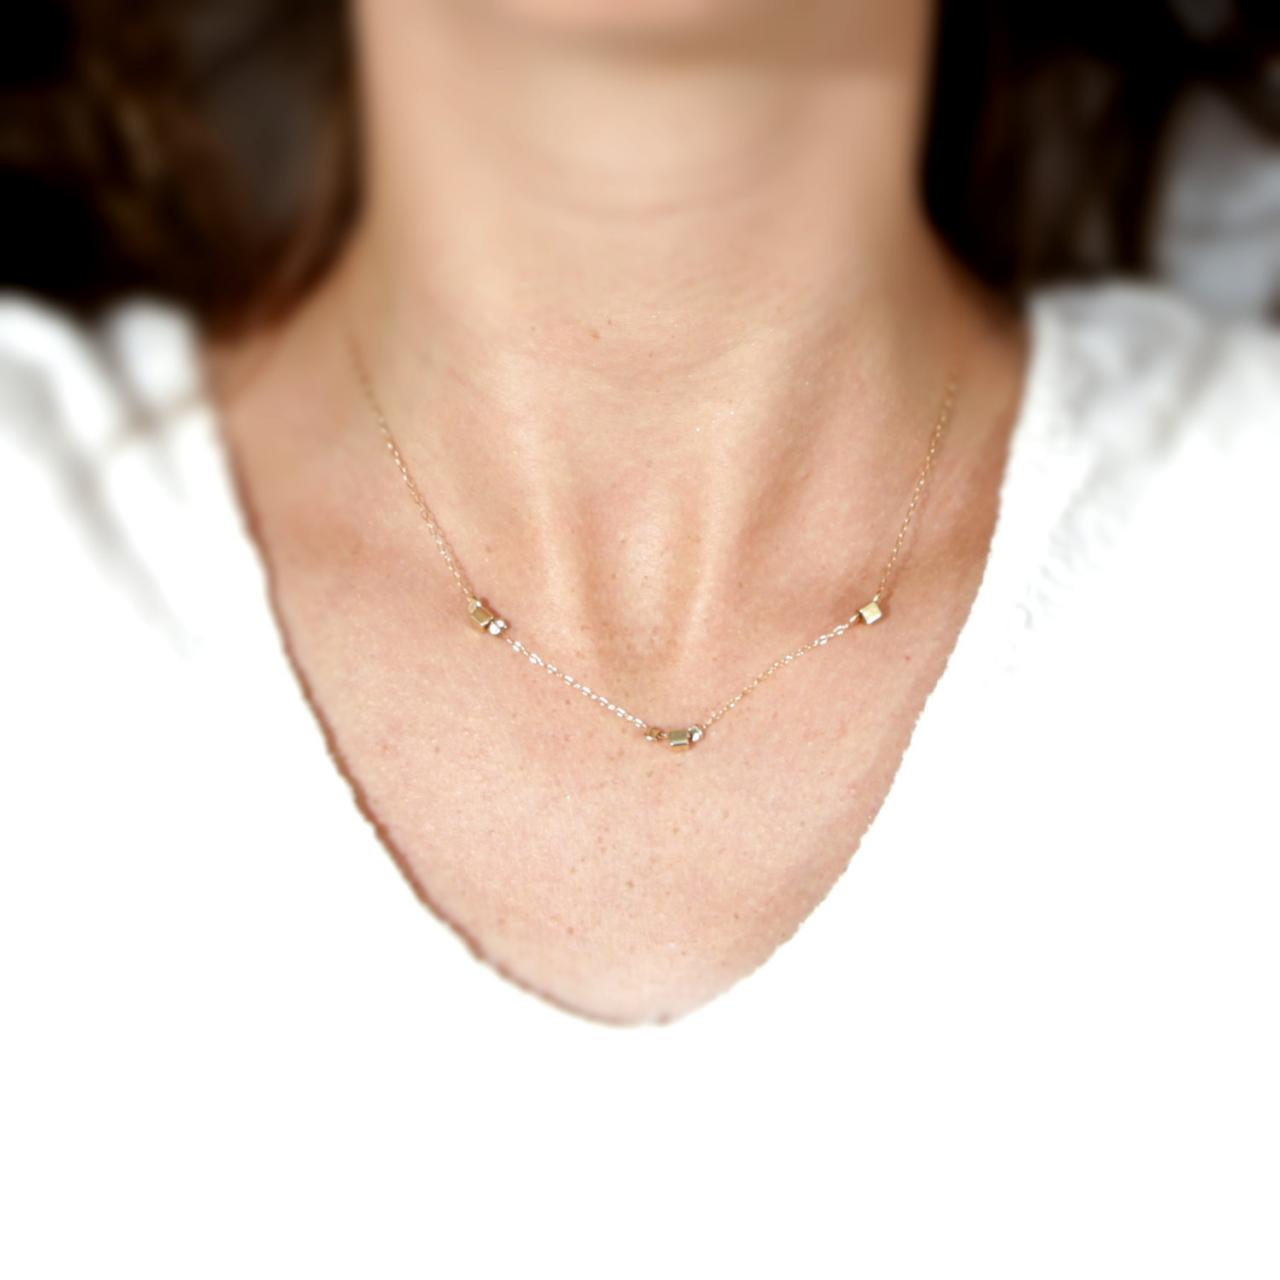 Gold Necklace, Bead Necklace, Gold Filled Necklace, Everyday Necklace, Bridesmaid Necklace - D15